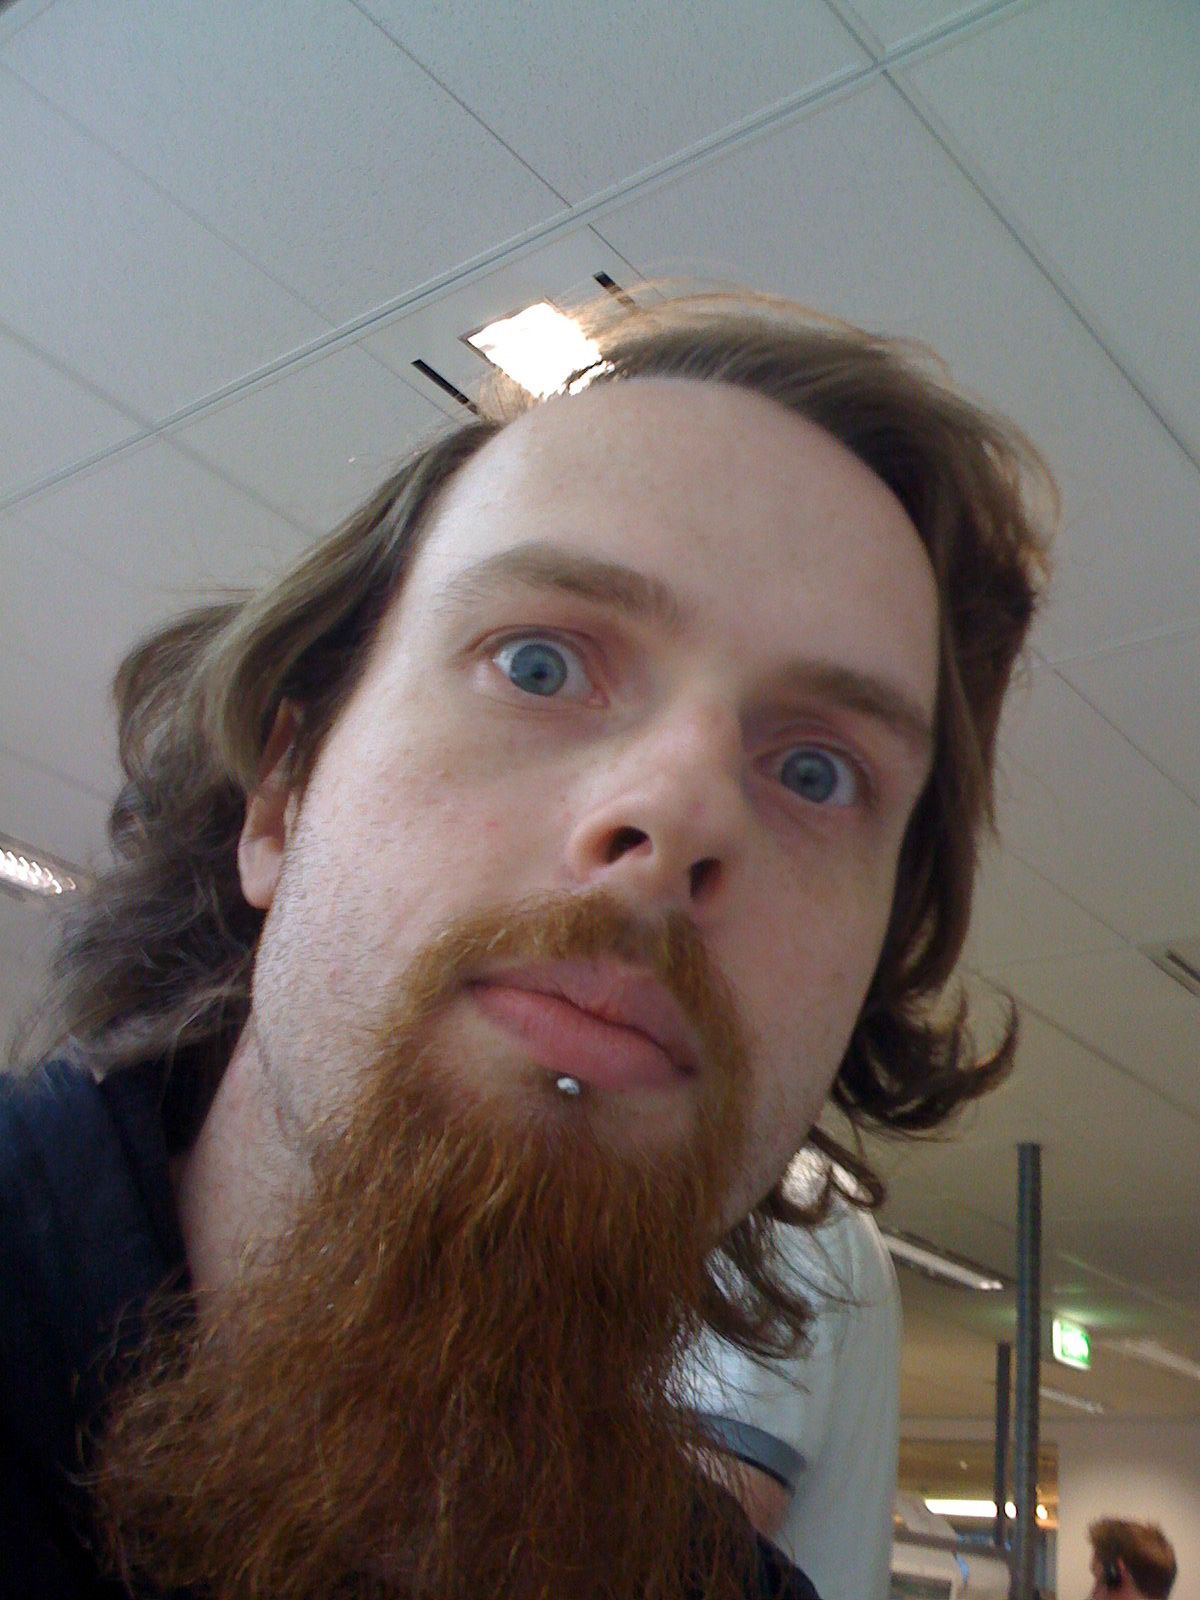 A selfie of me, a white man with long-ish hair and a very long red goatee, looking intensely at the camera.